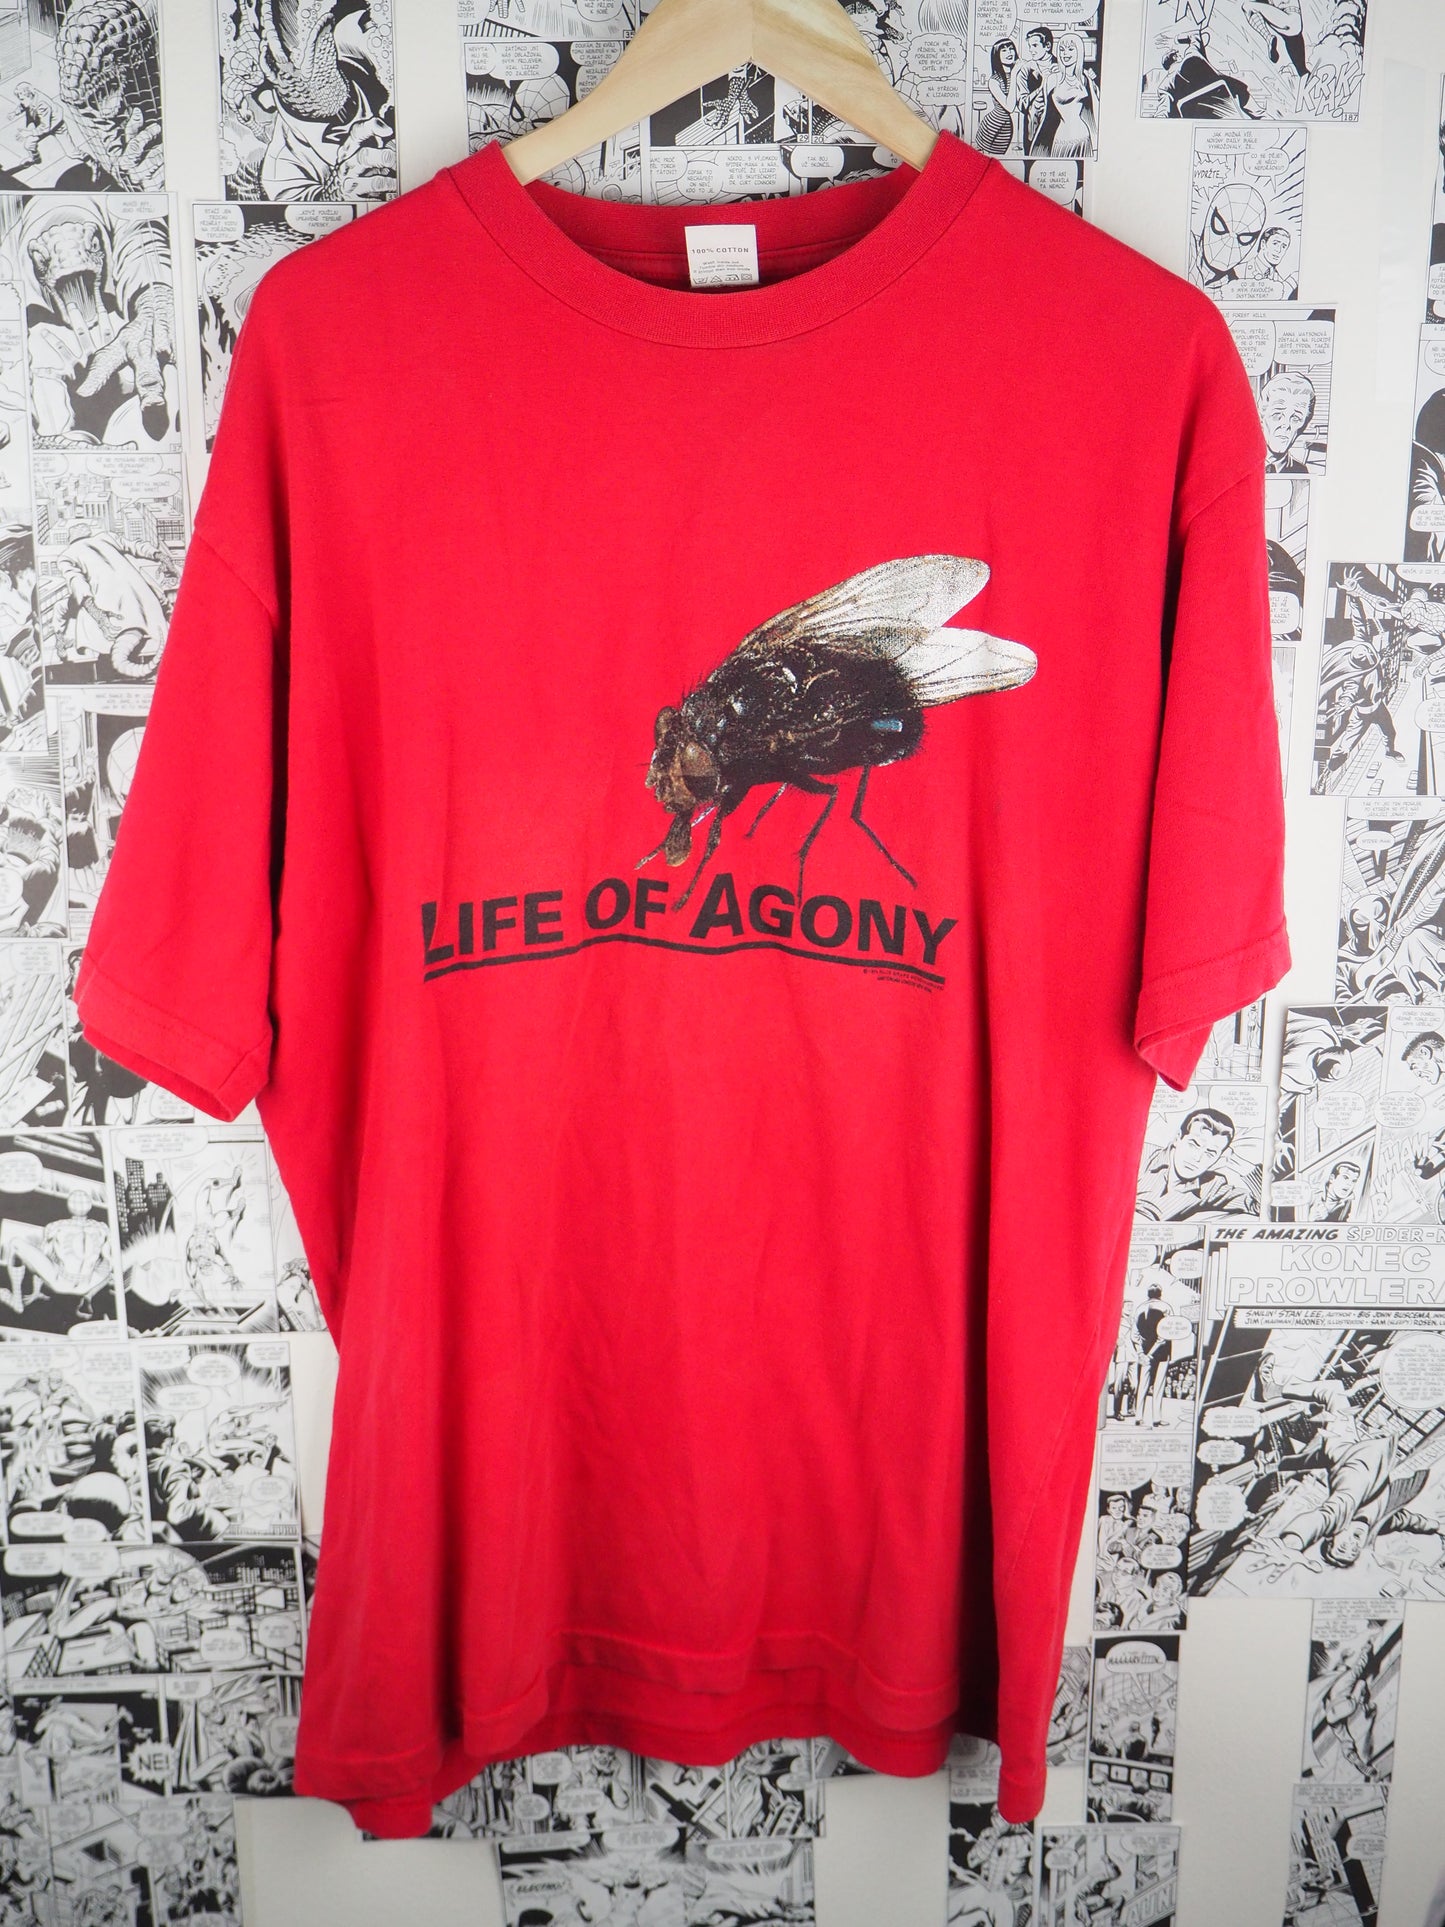 Vintage Life of Agony "If i knew how to fly" 1996 t-shirt - size XL